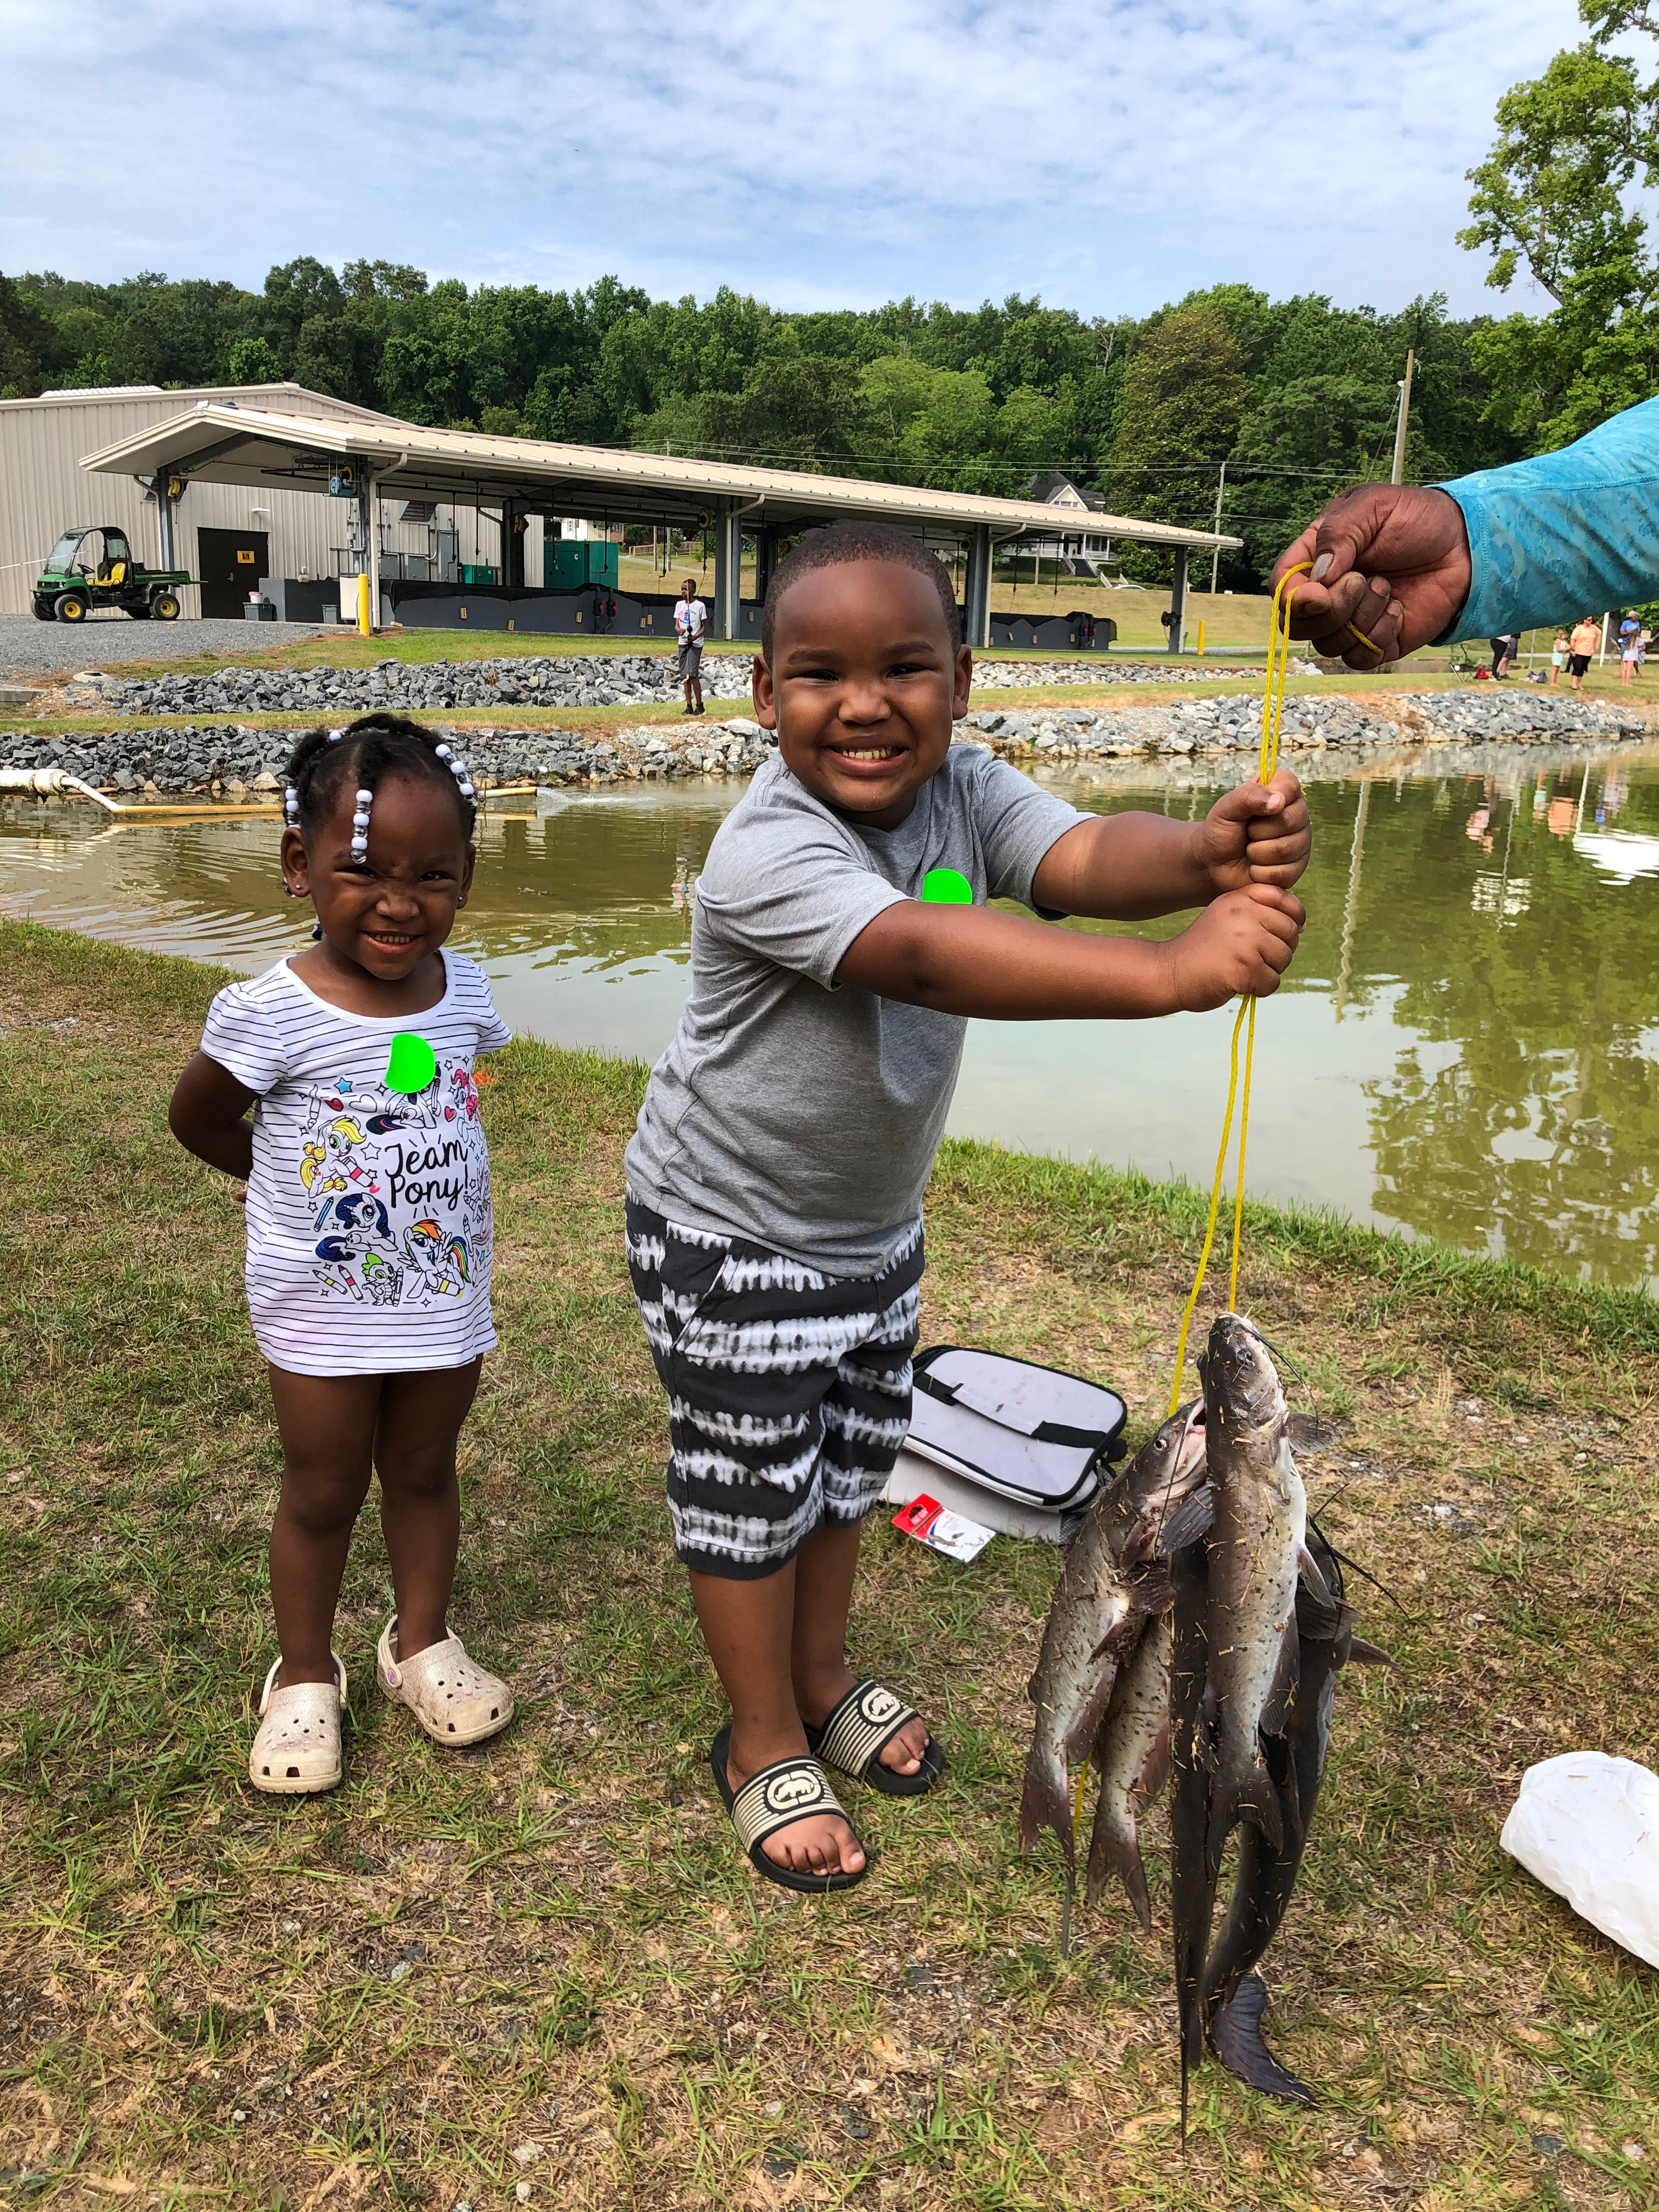 USFWS Fisheries on X: Every year THOUSANDS of kids fall in love